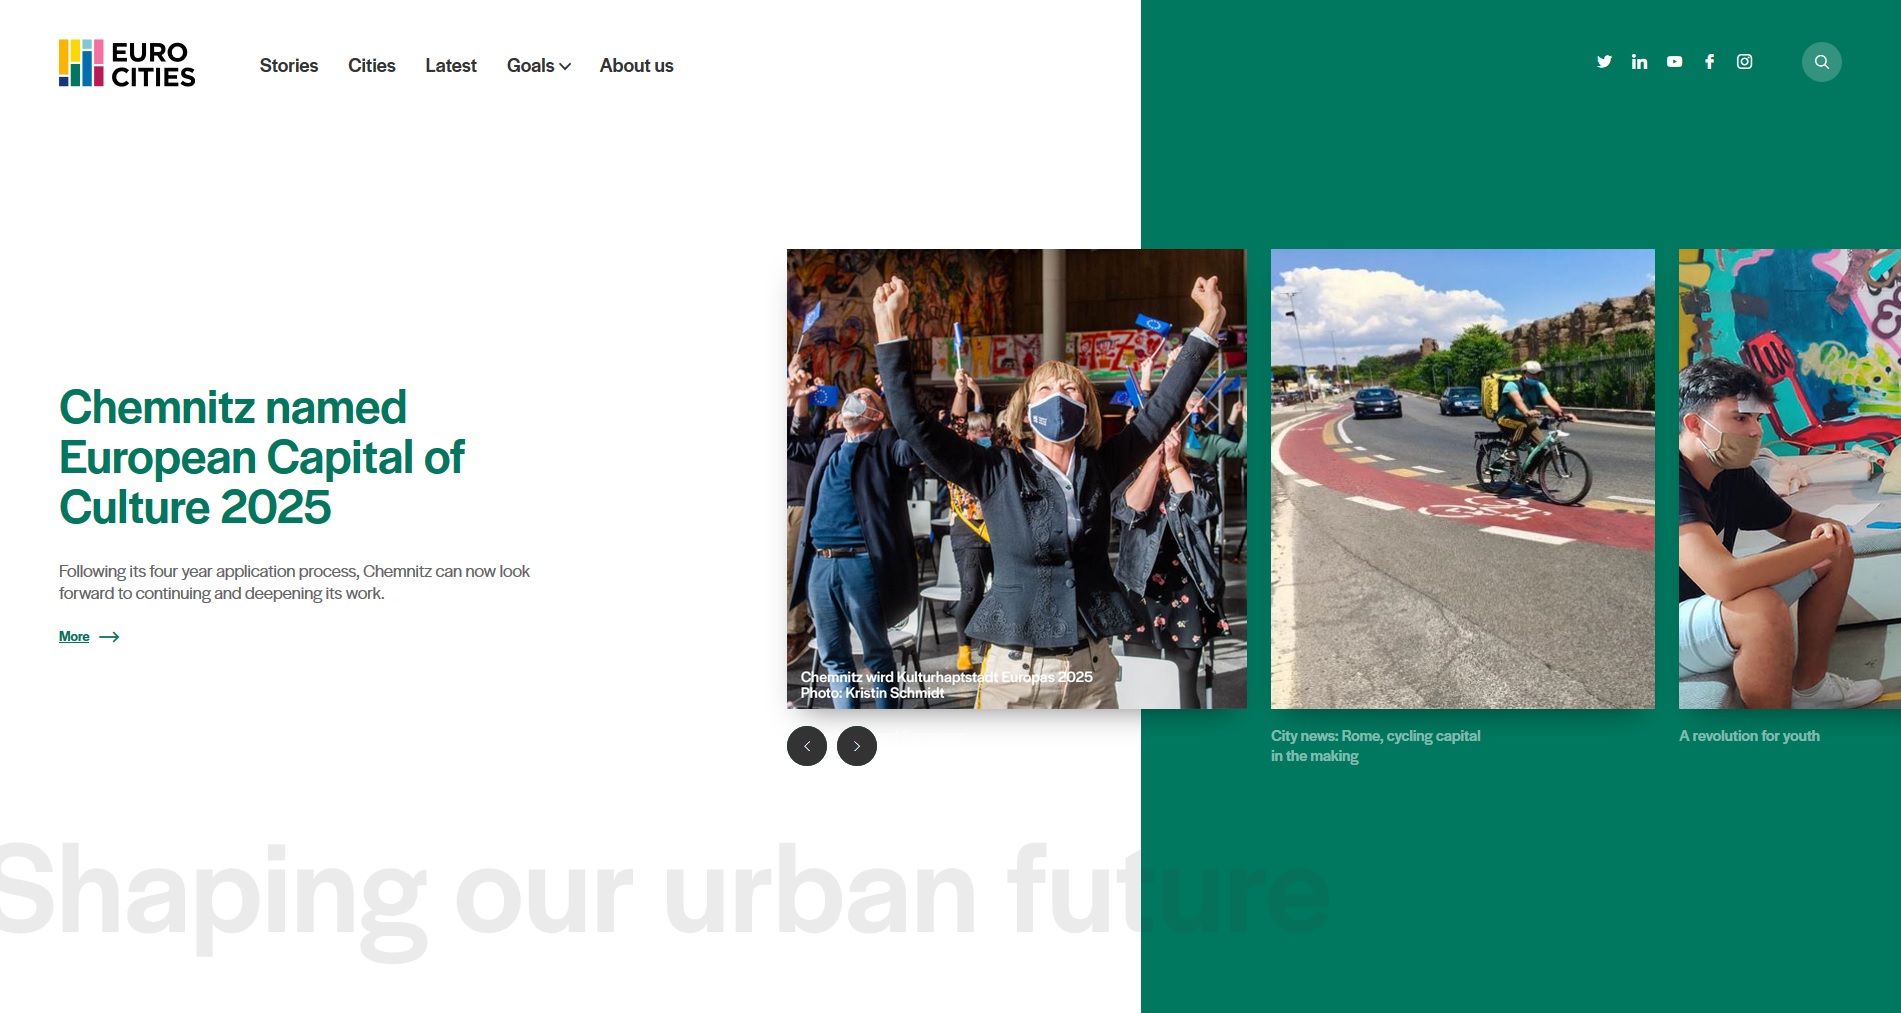 The EUROCITIES website has been given a revamp